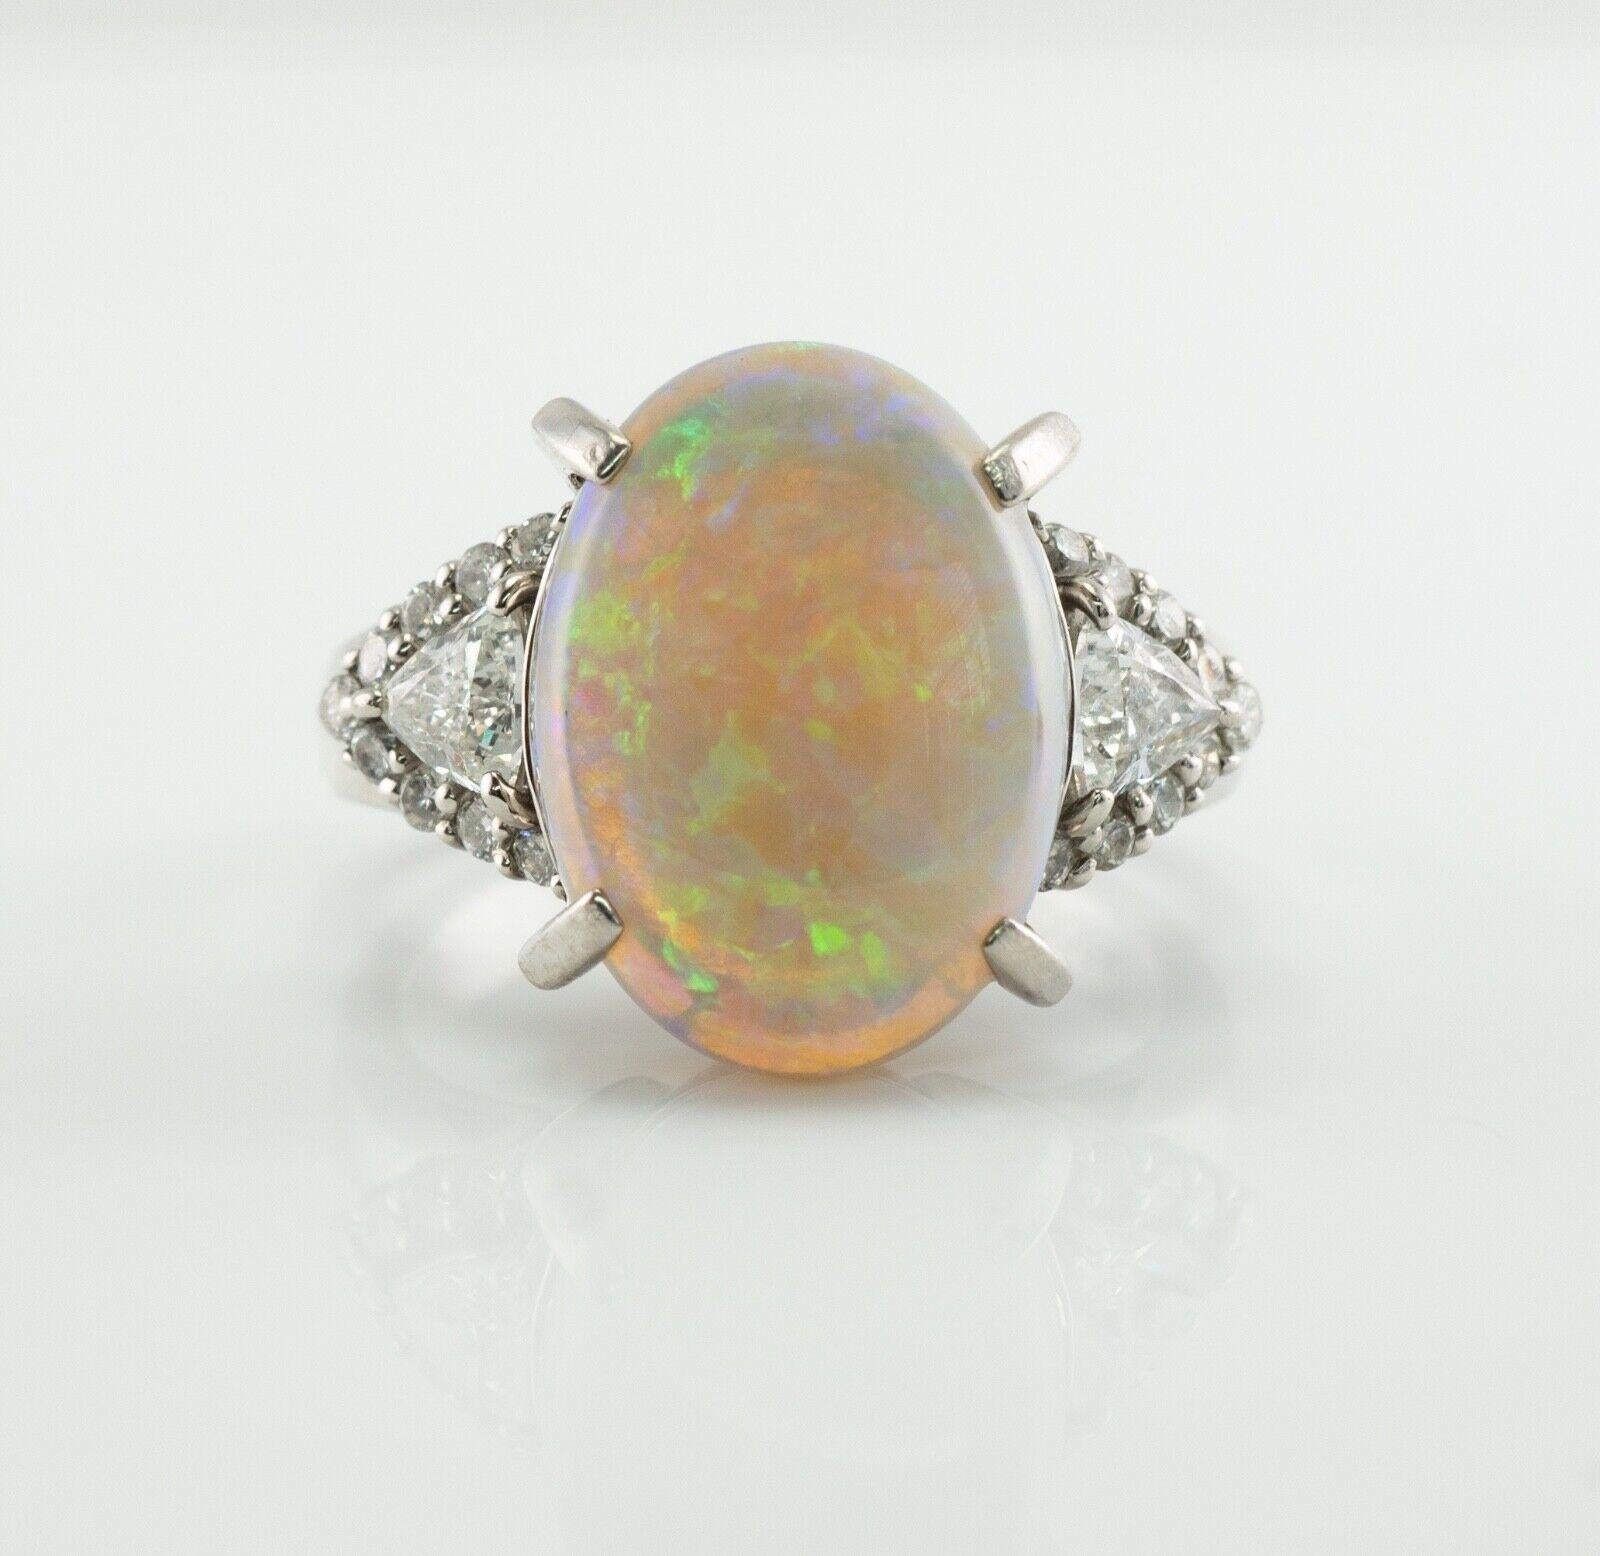 Trillion Cut Diamond Opal Ring Platinum

This estate ring is made in solid Platinum and set with genuine Opal and diamonds.
The center Earth mined Opal measures 14mm x 10mm (3.90 carats). 
It has splashes of electric green, blue, orange colors! 
Two